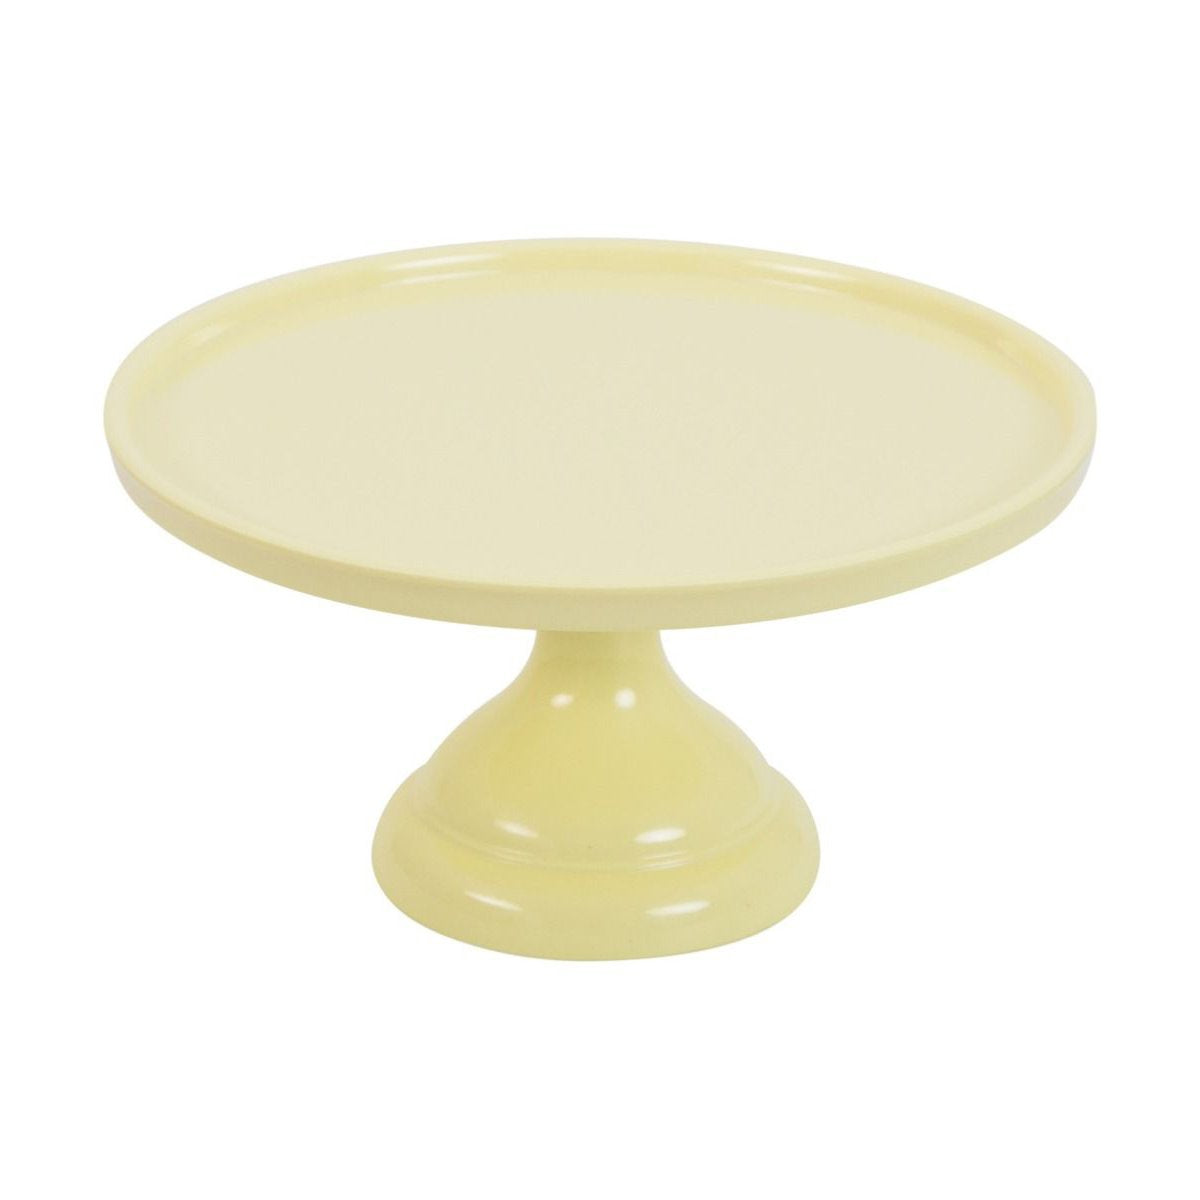 a-little-lovely-company-cake-stand-small-yellow- (1)